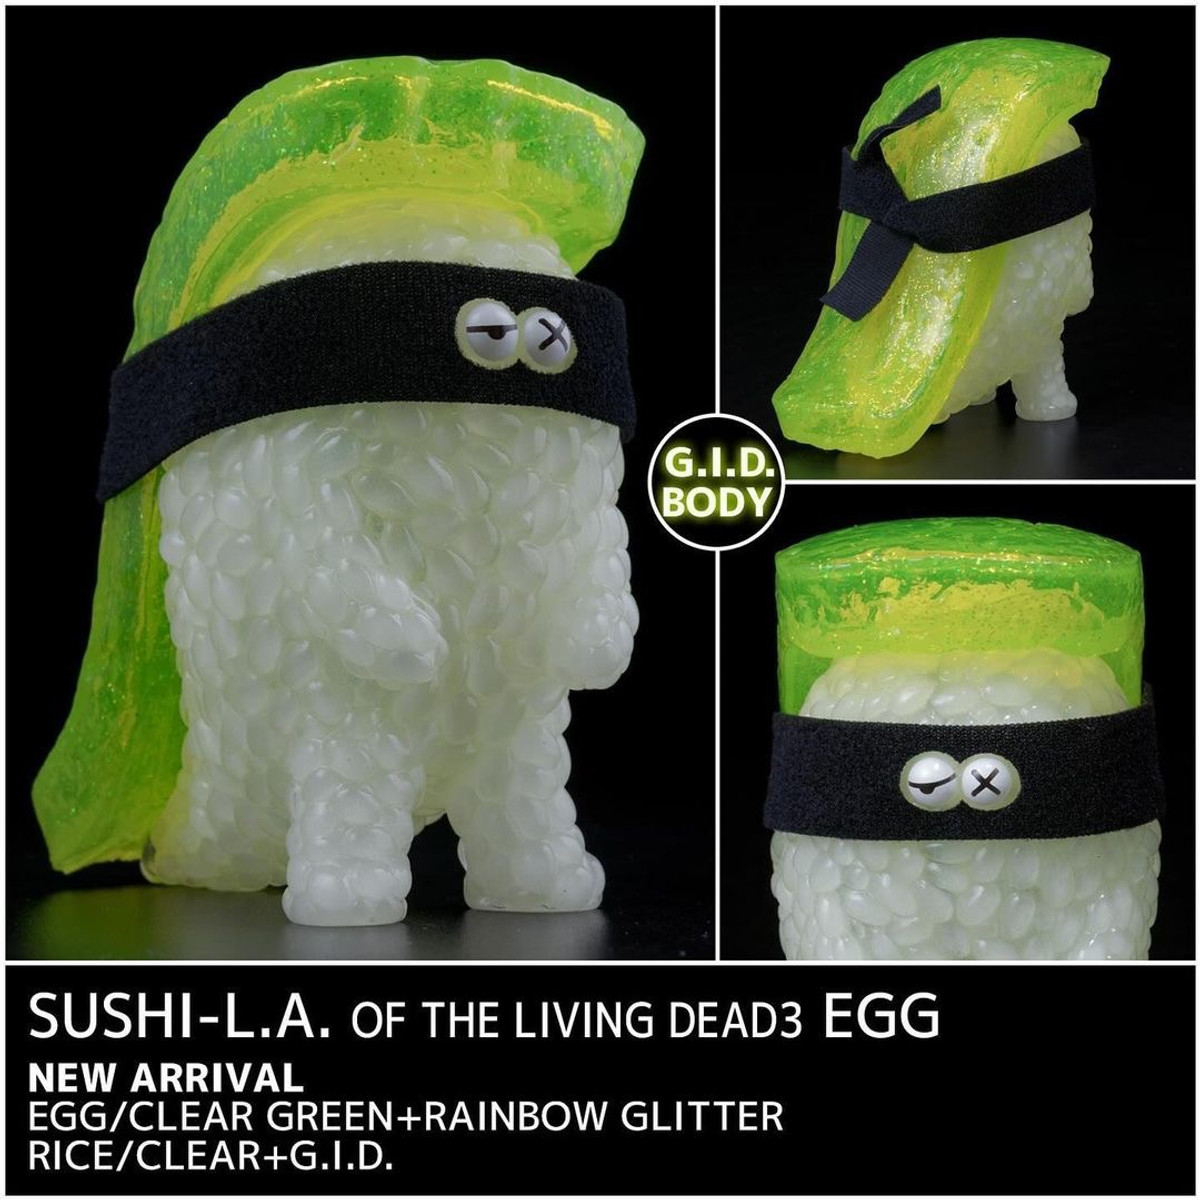 Sushi L.A. of the Living Dead 3 Egg